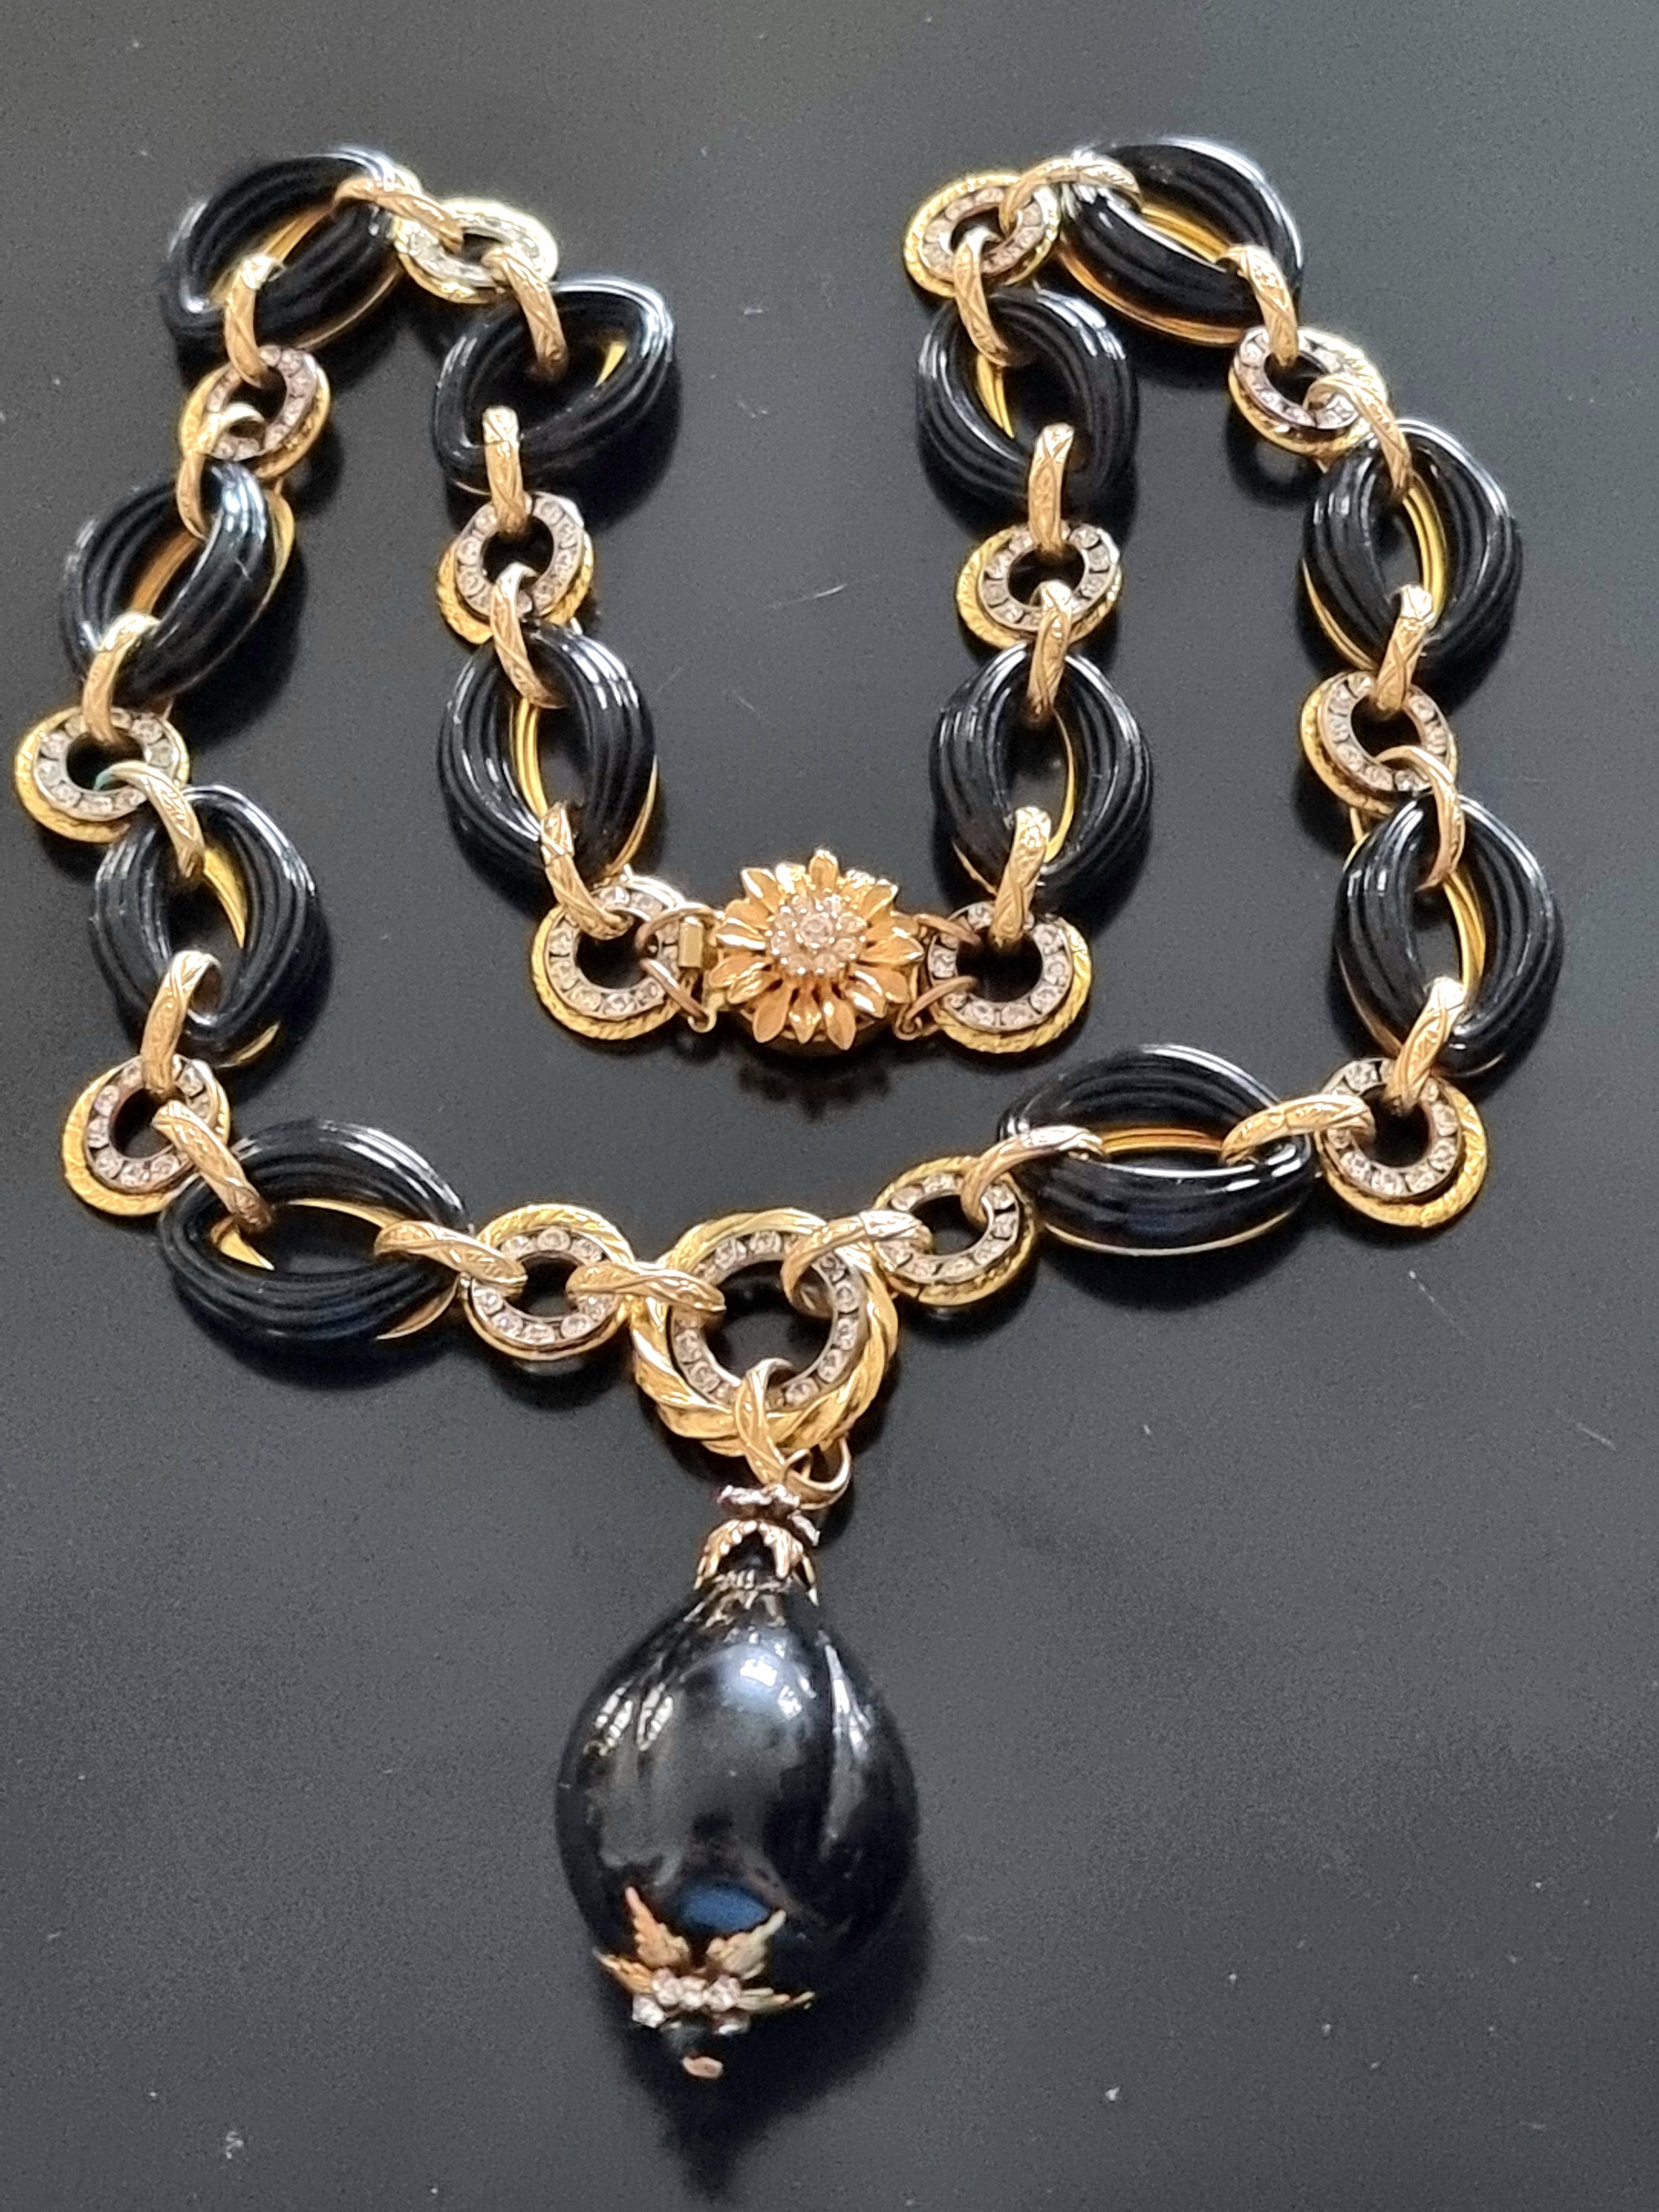 Women's CHANEL, Magnificent vintage NECKLACE, High Fashion, France